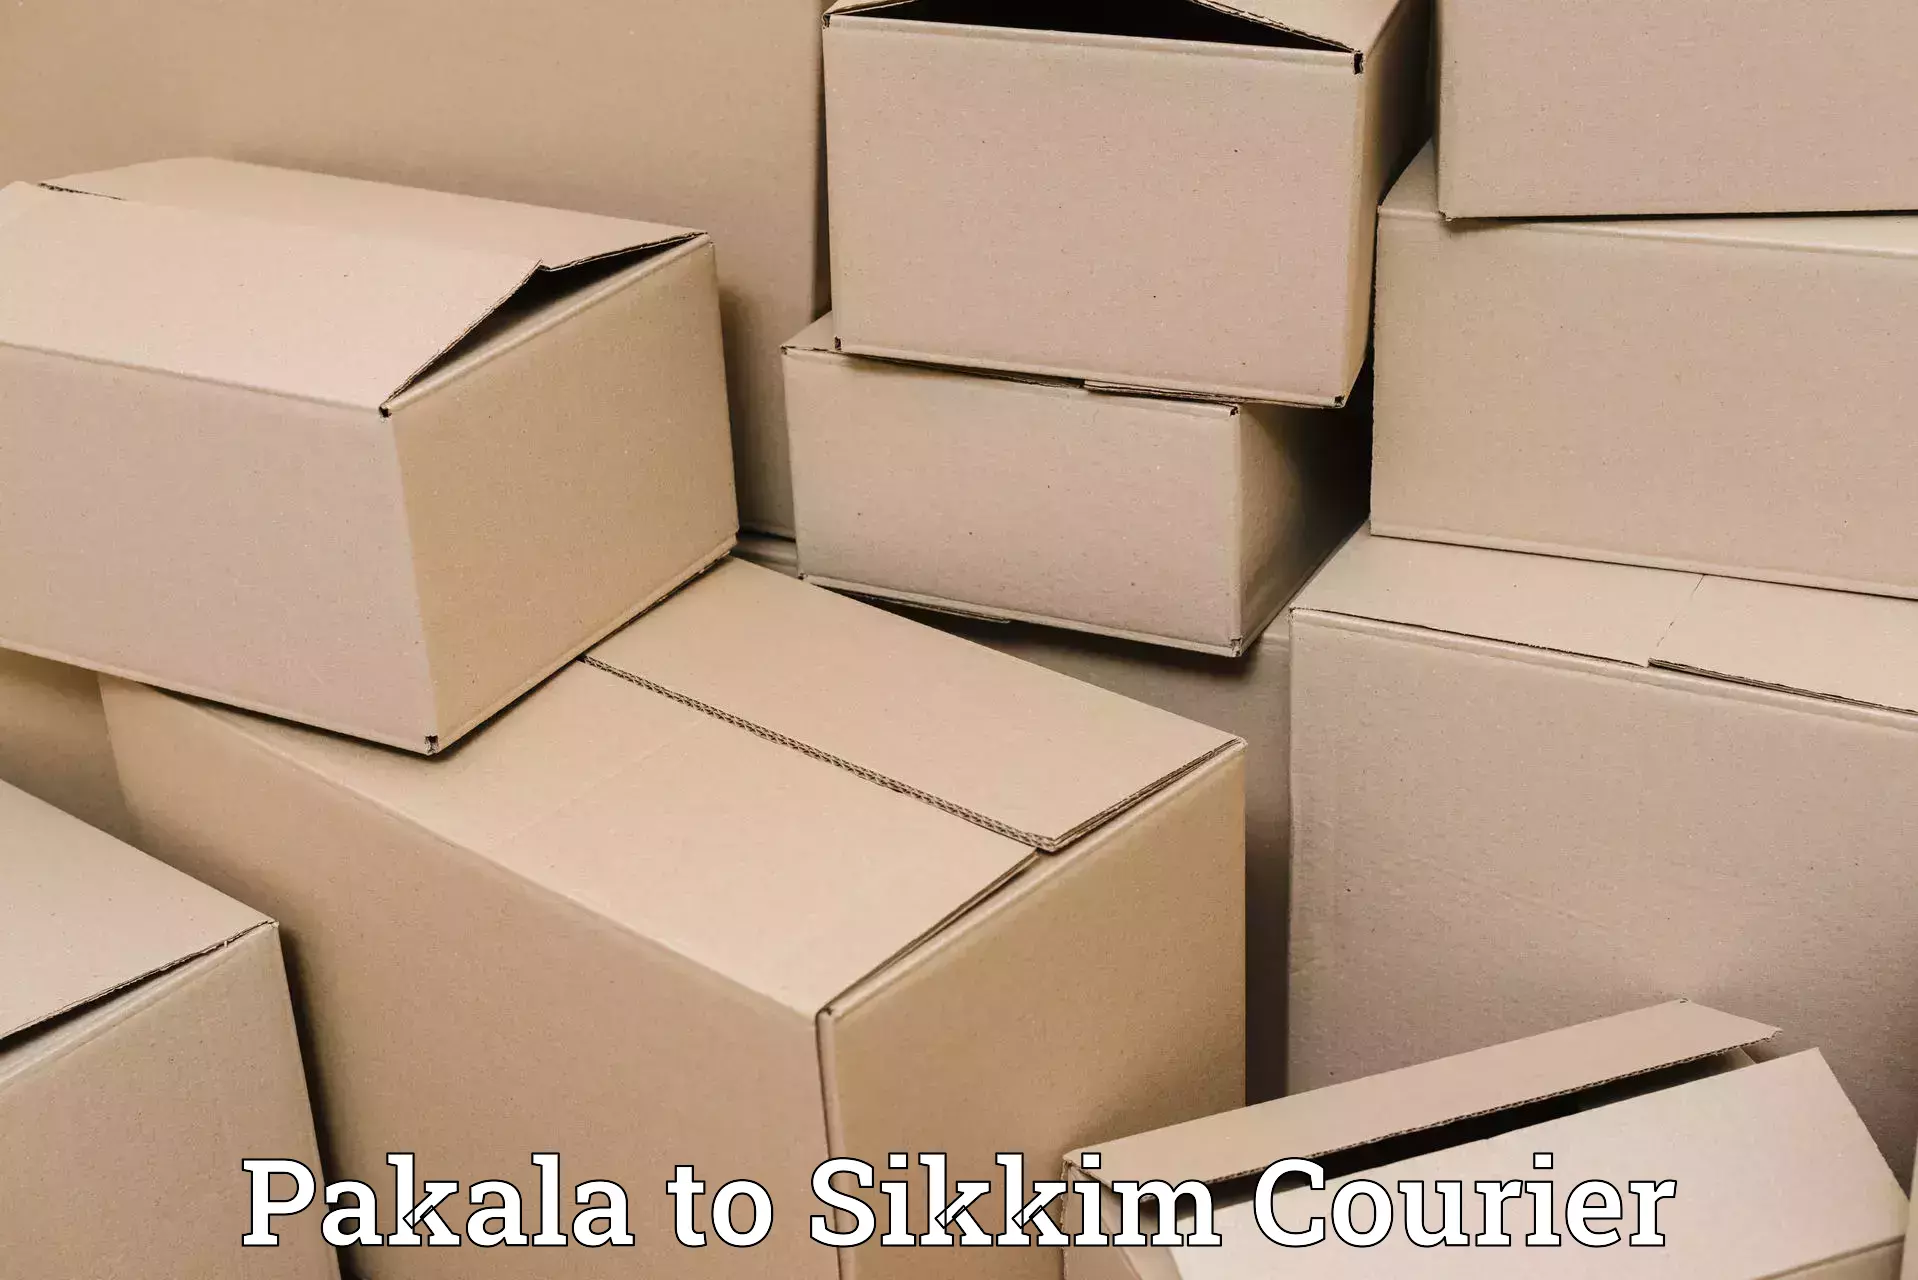 Subscription-based courier Pakala to North Sikkim